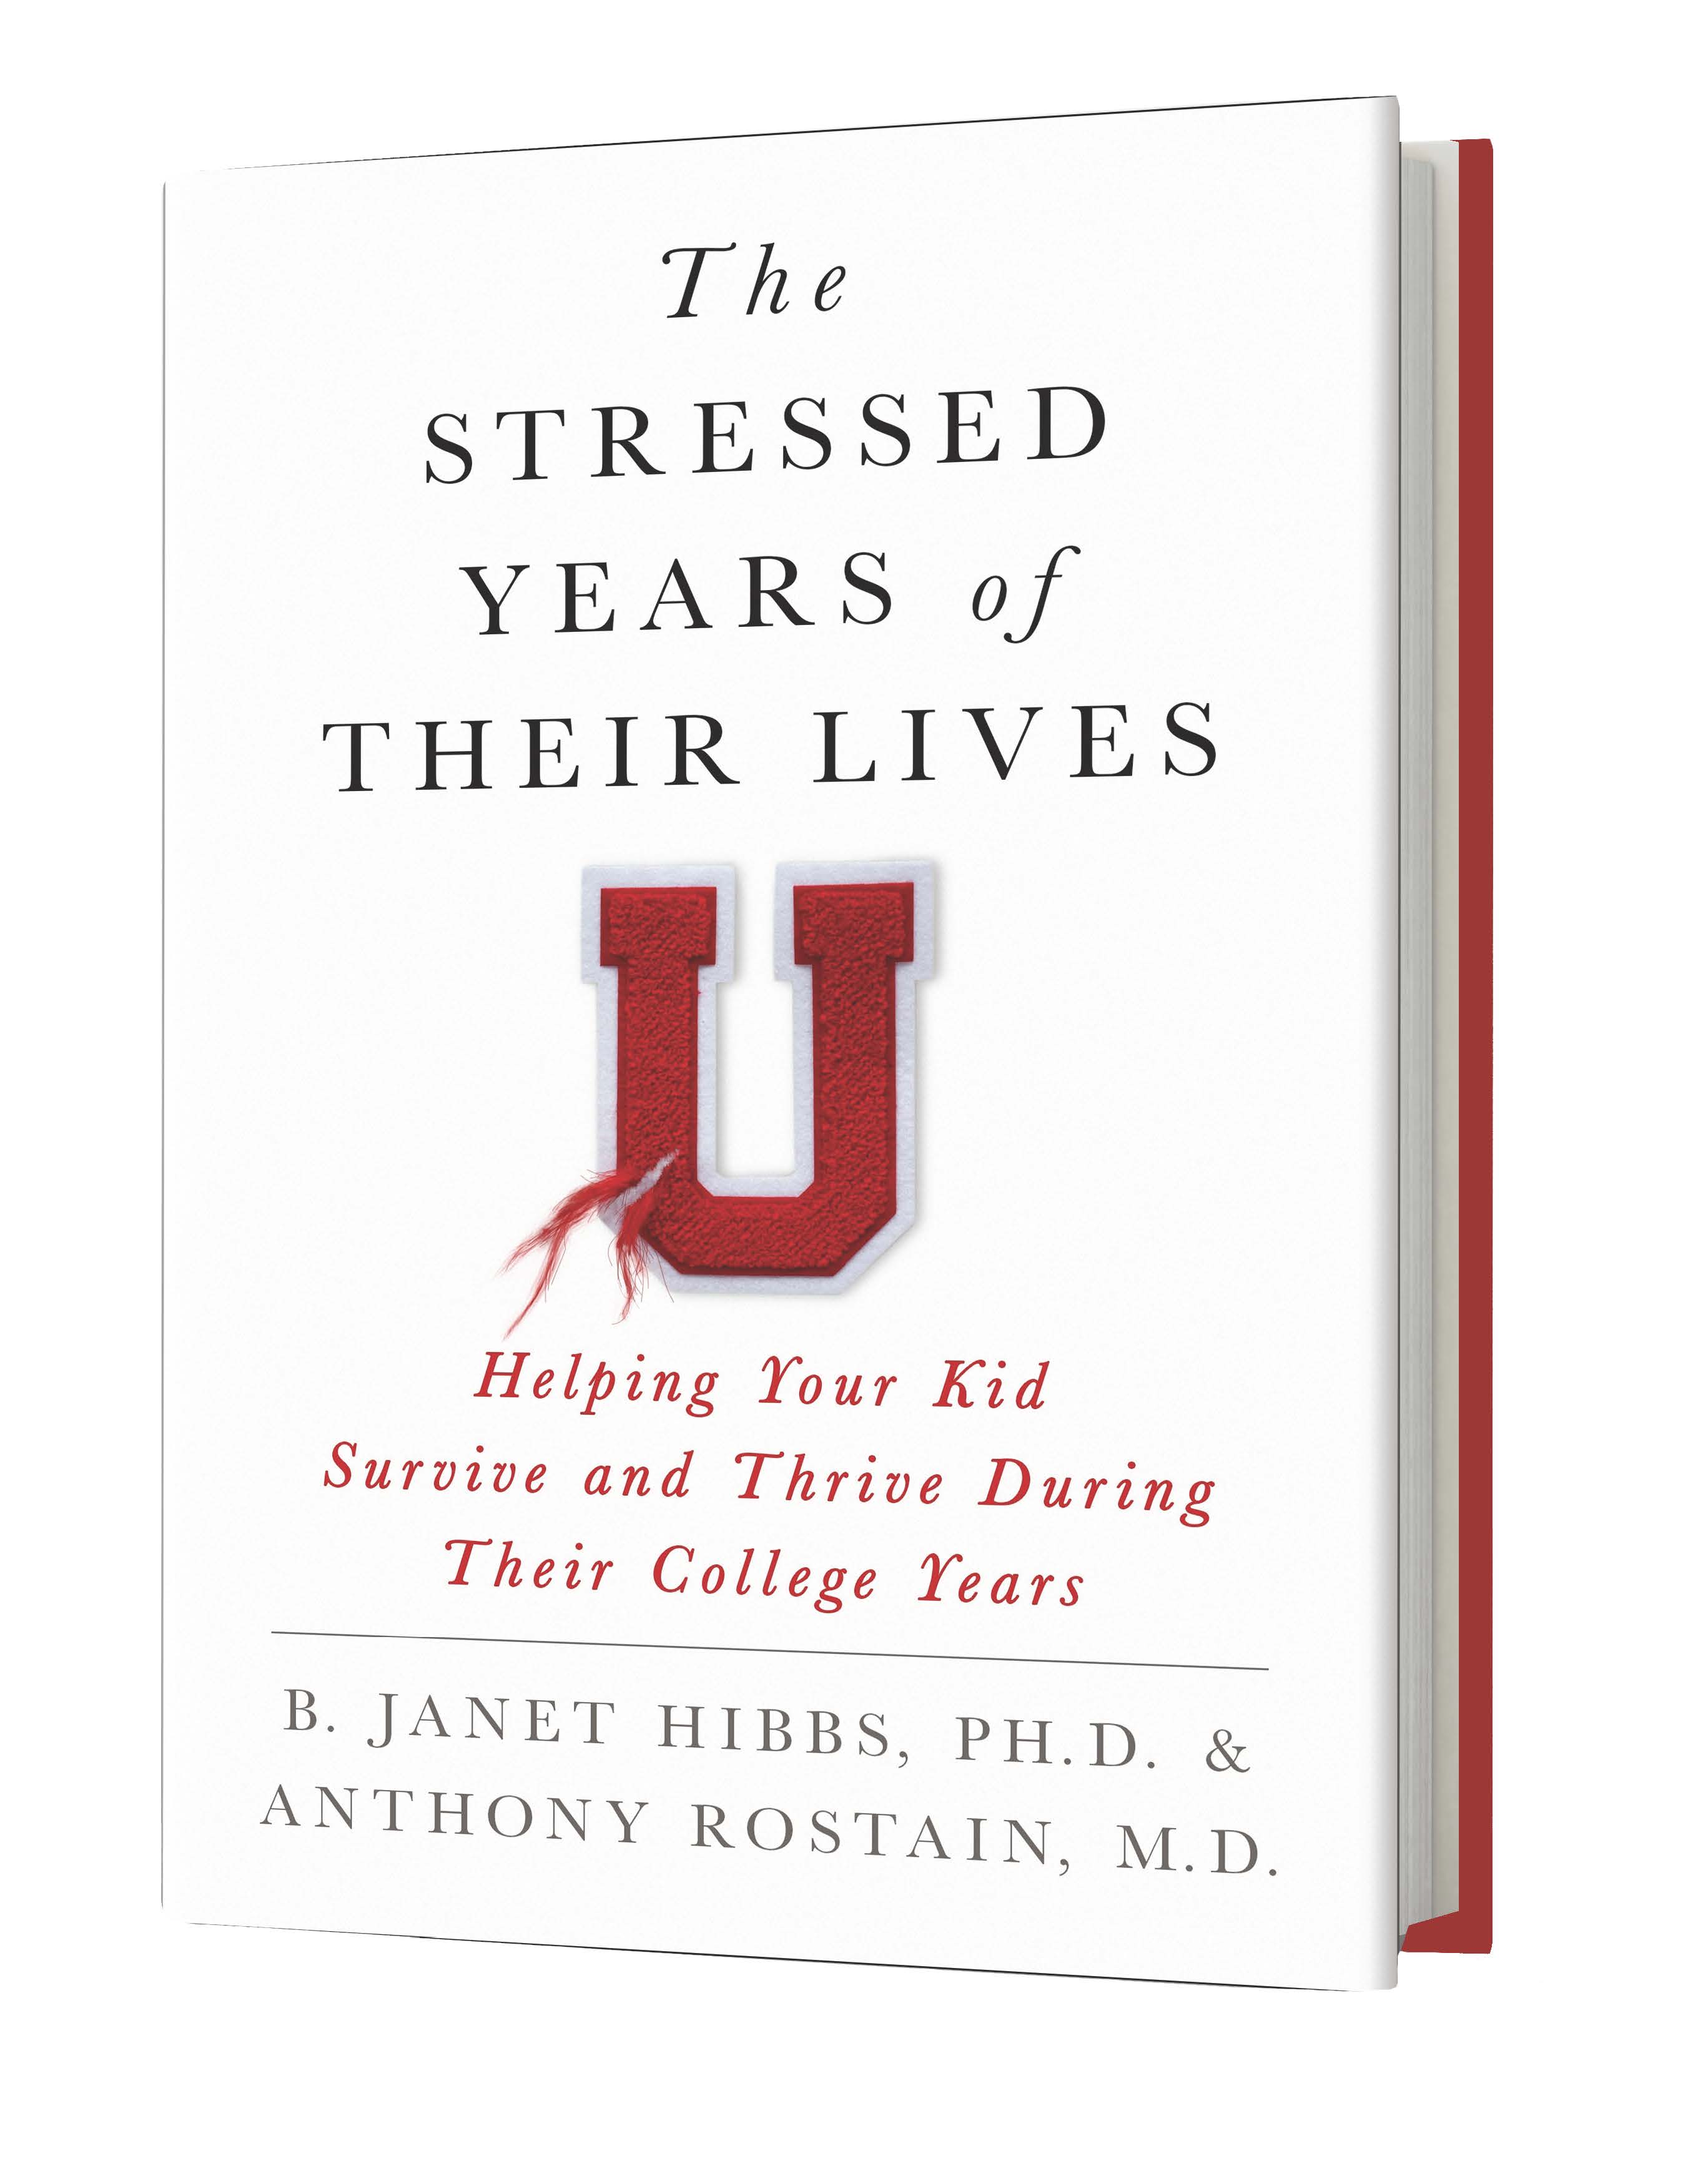 image of the book cover "The Stressed Years of Their Lives" by B. Janet Hibbs and Anthony Rostain